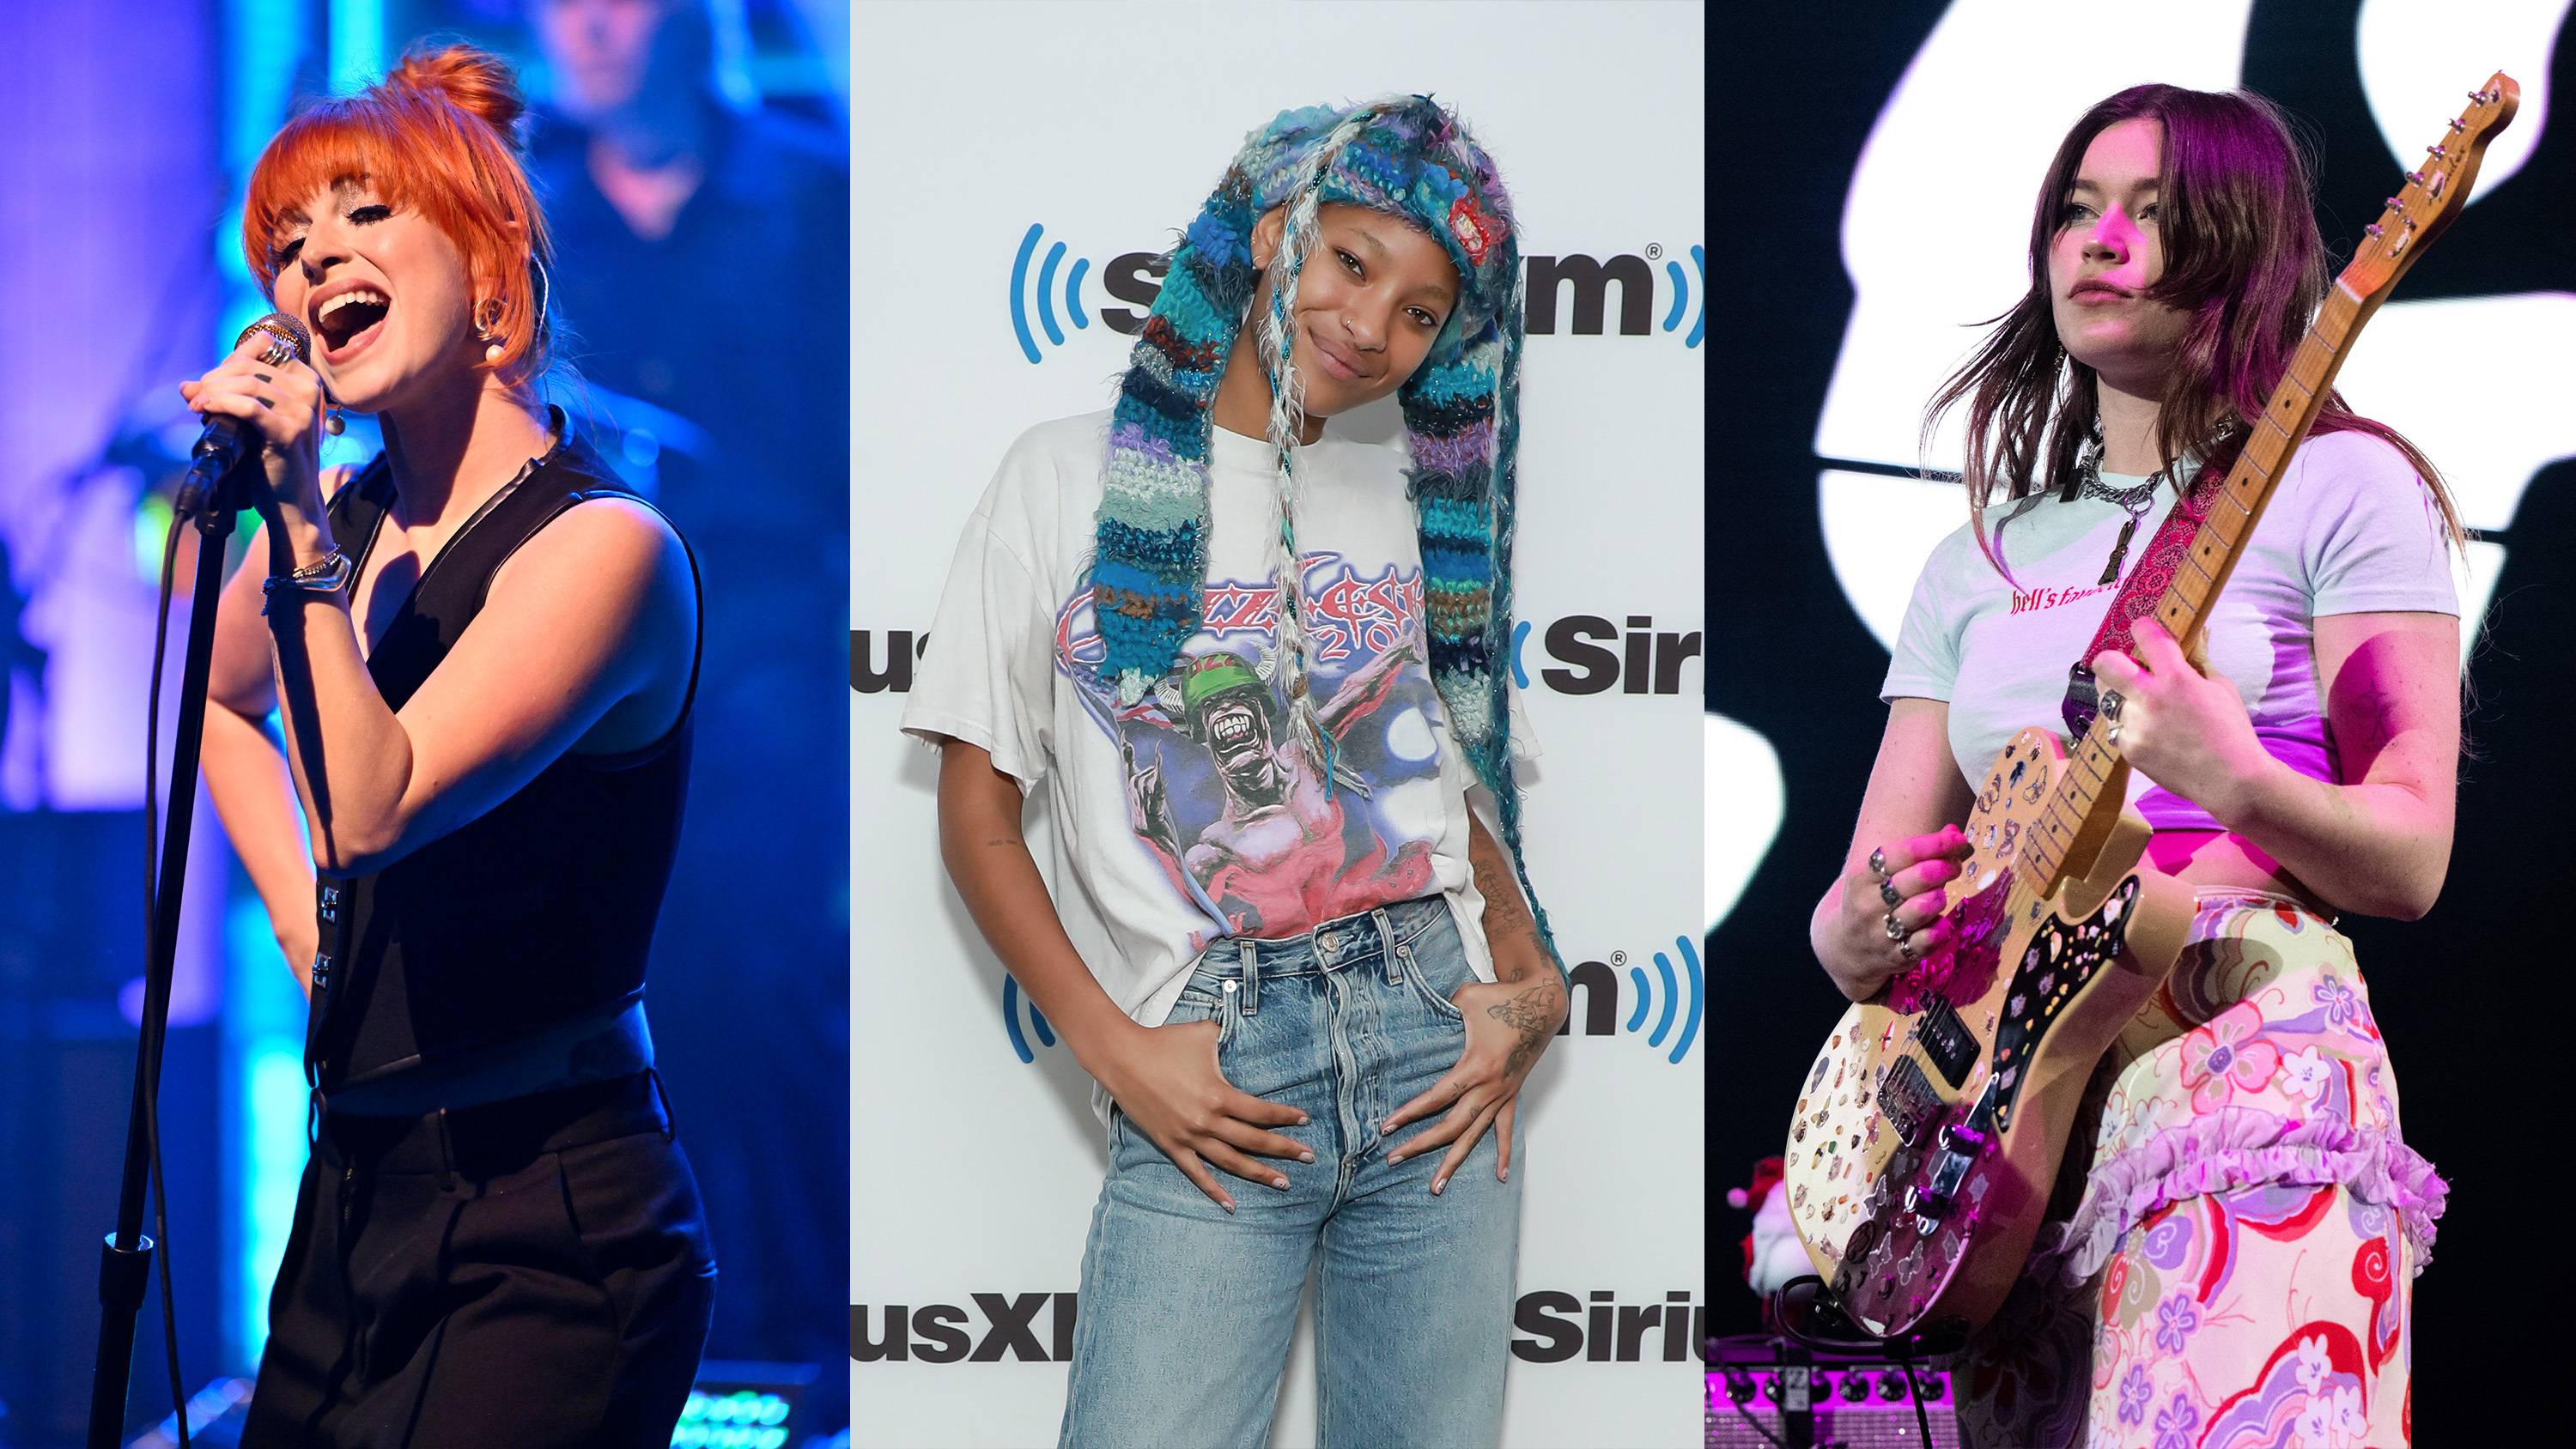 A triptych of Paramore's Hayley Williams, Willow Smith, and Wet Leg's Rhian Teasdale